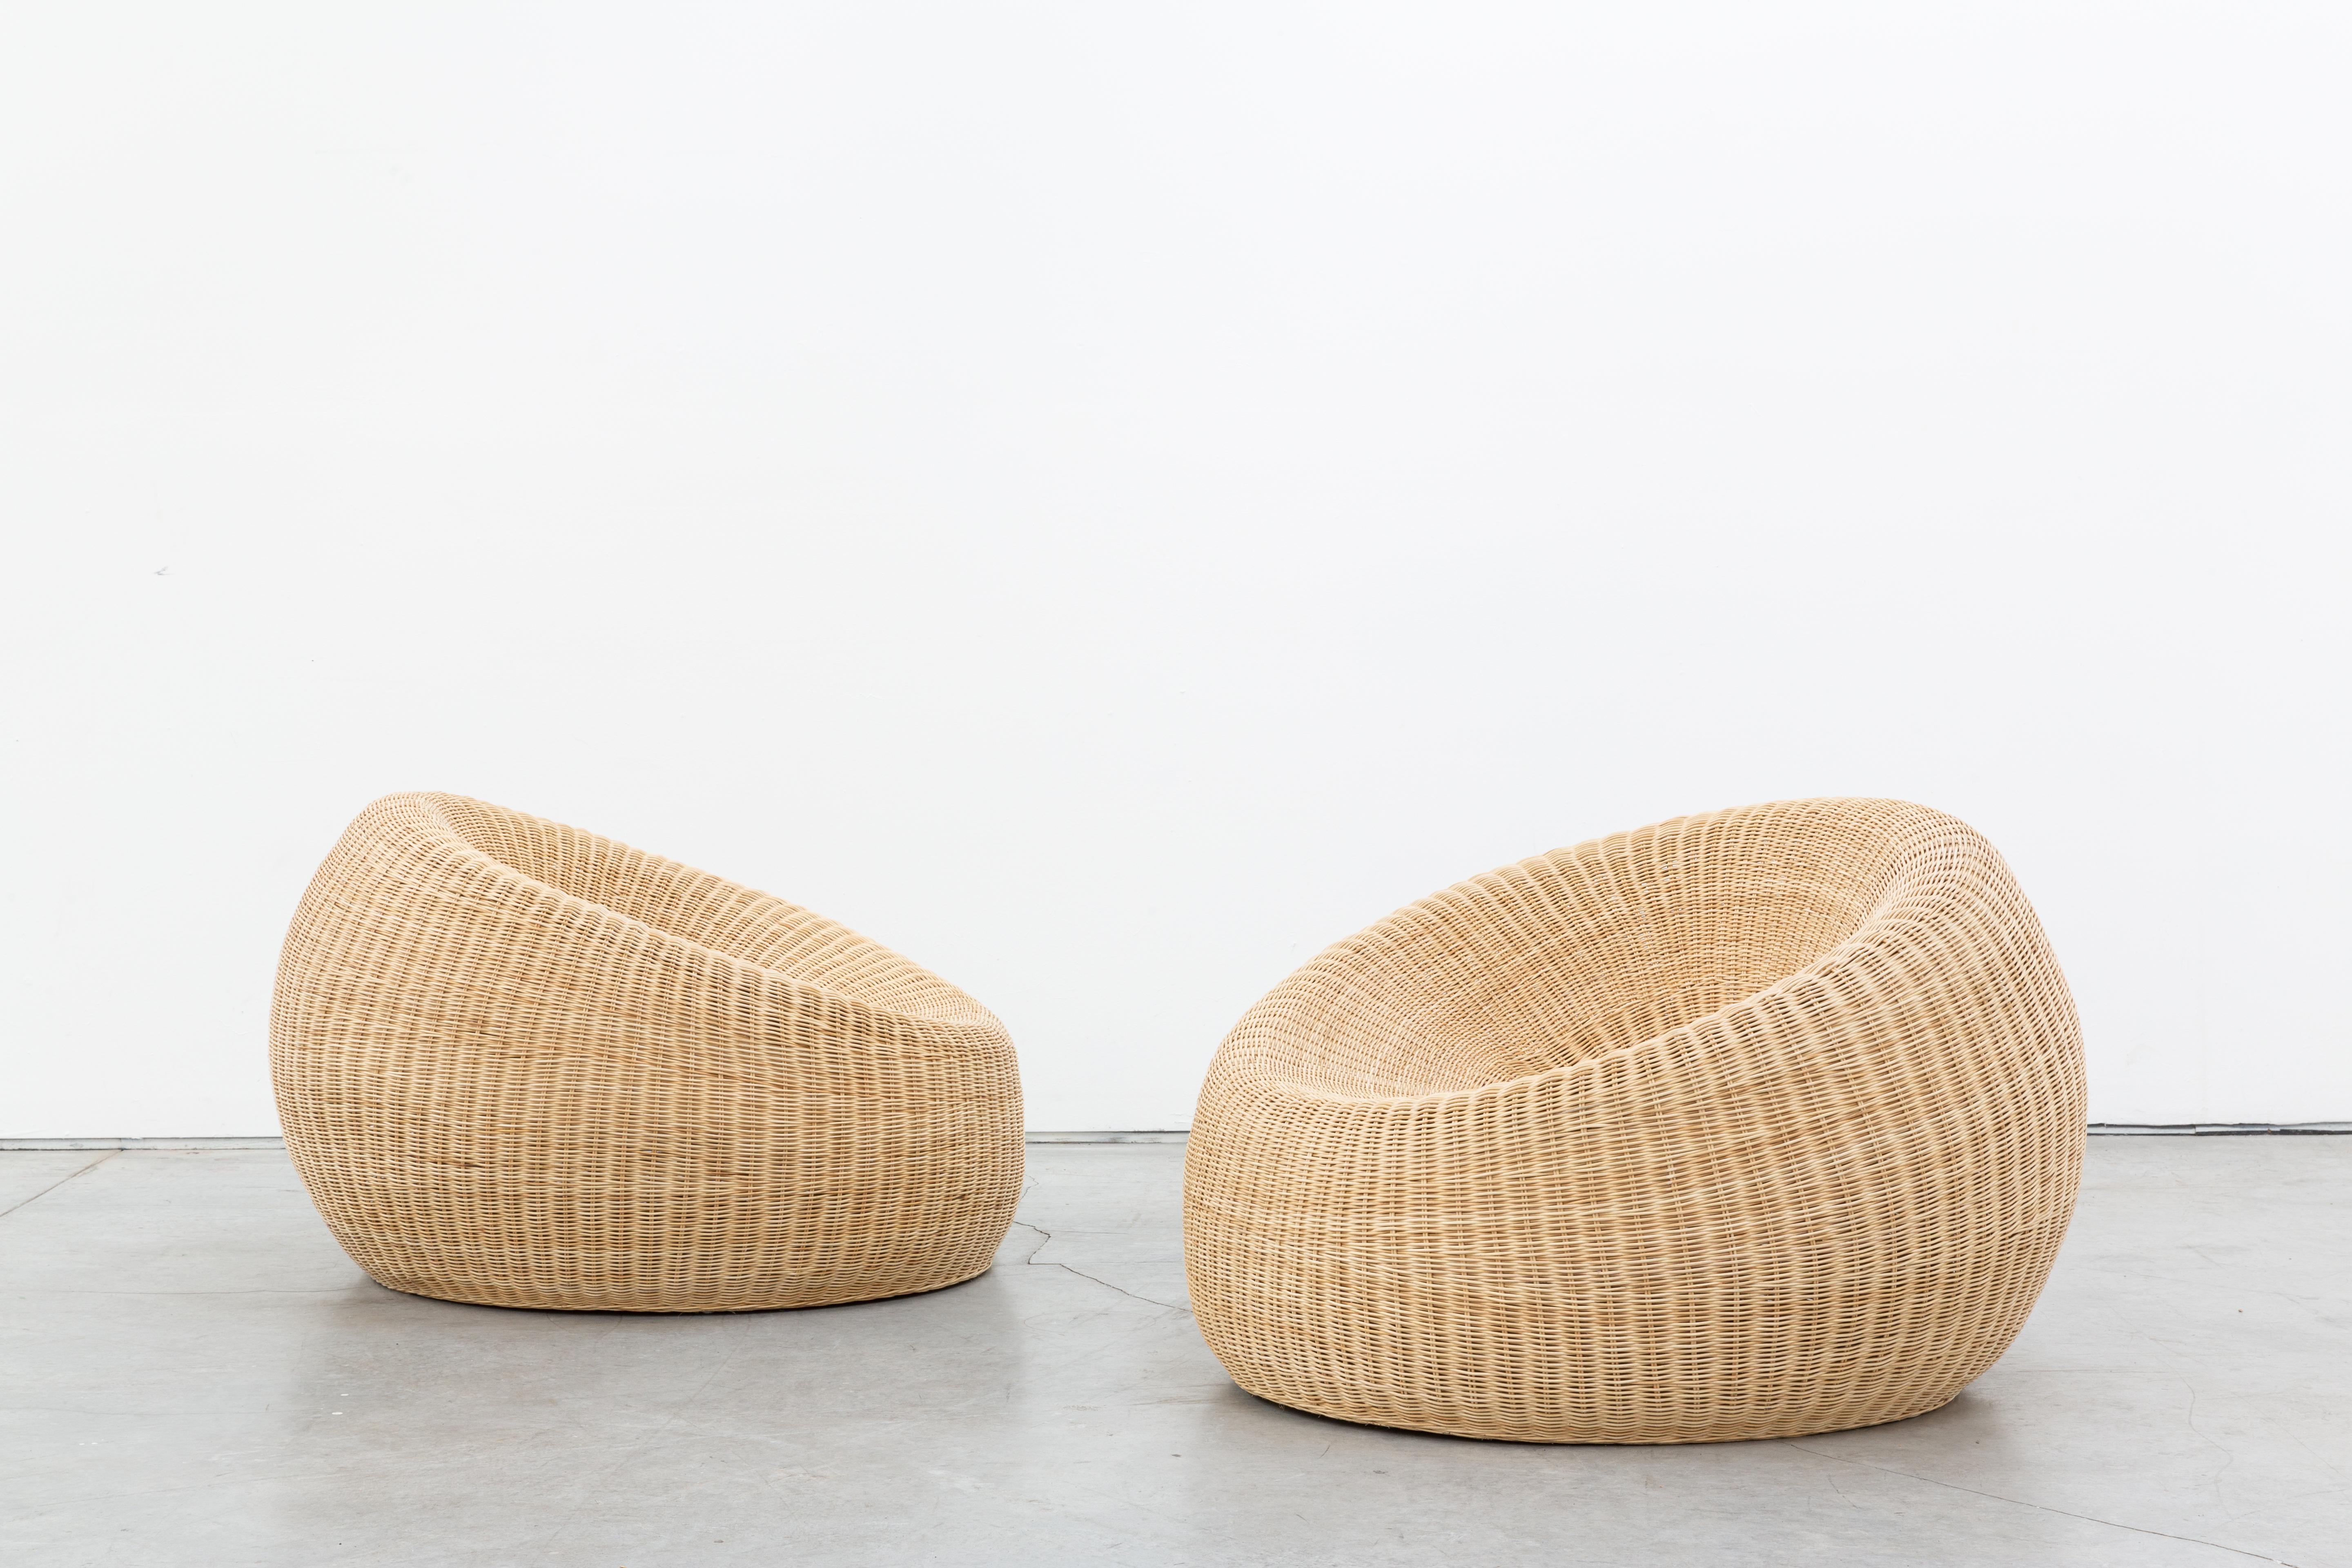 Balinese Nest Chair by CEU Studio, Represented by Tuleste Factory For Sale